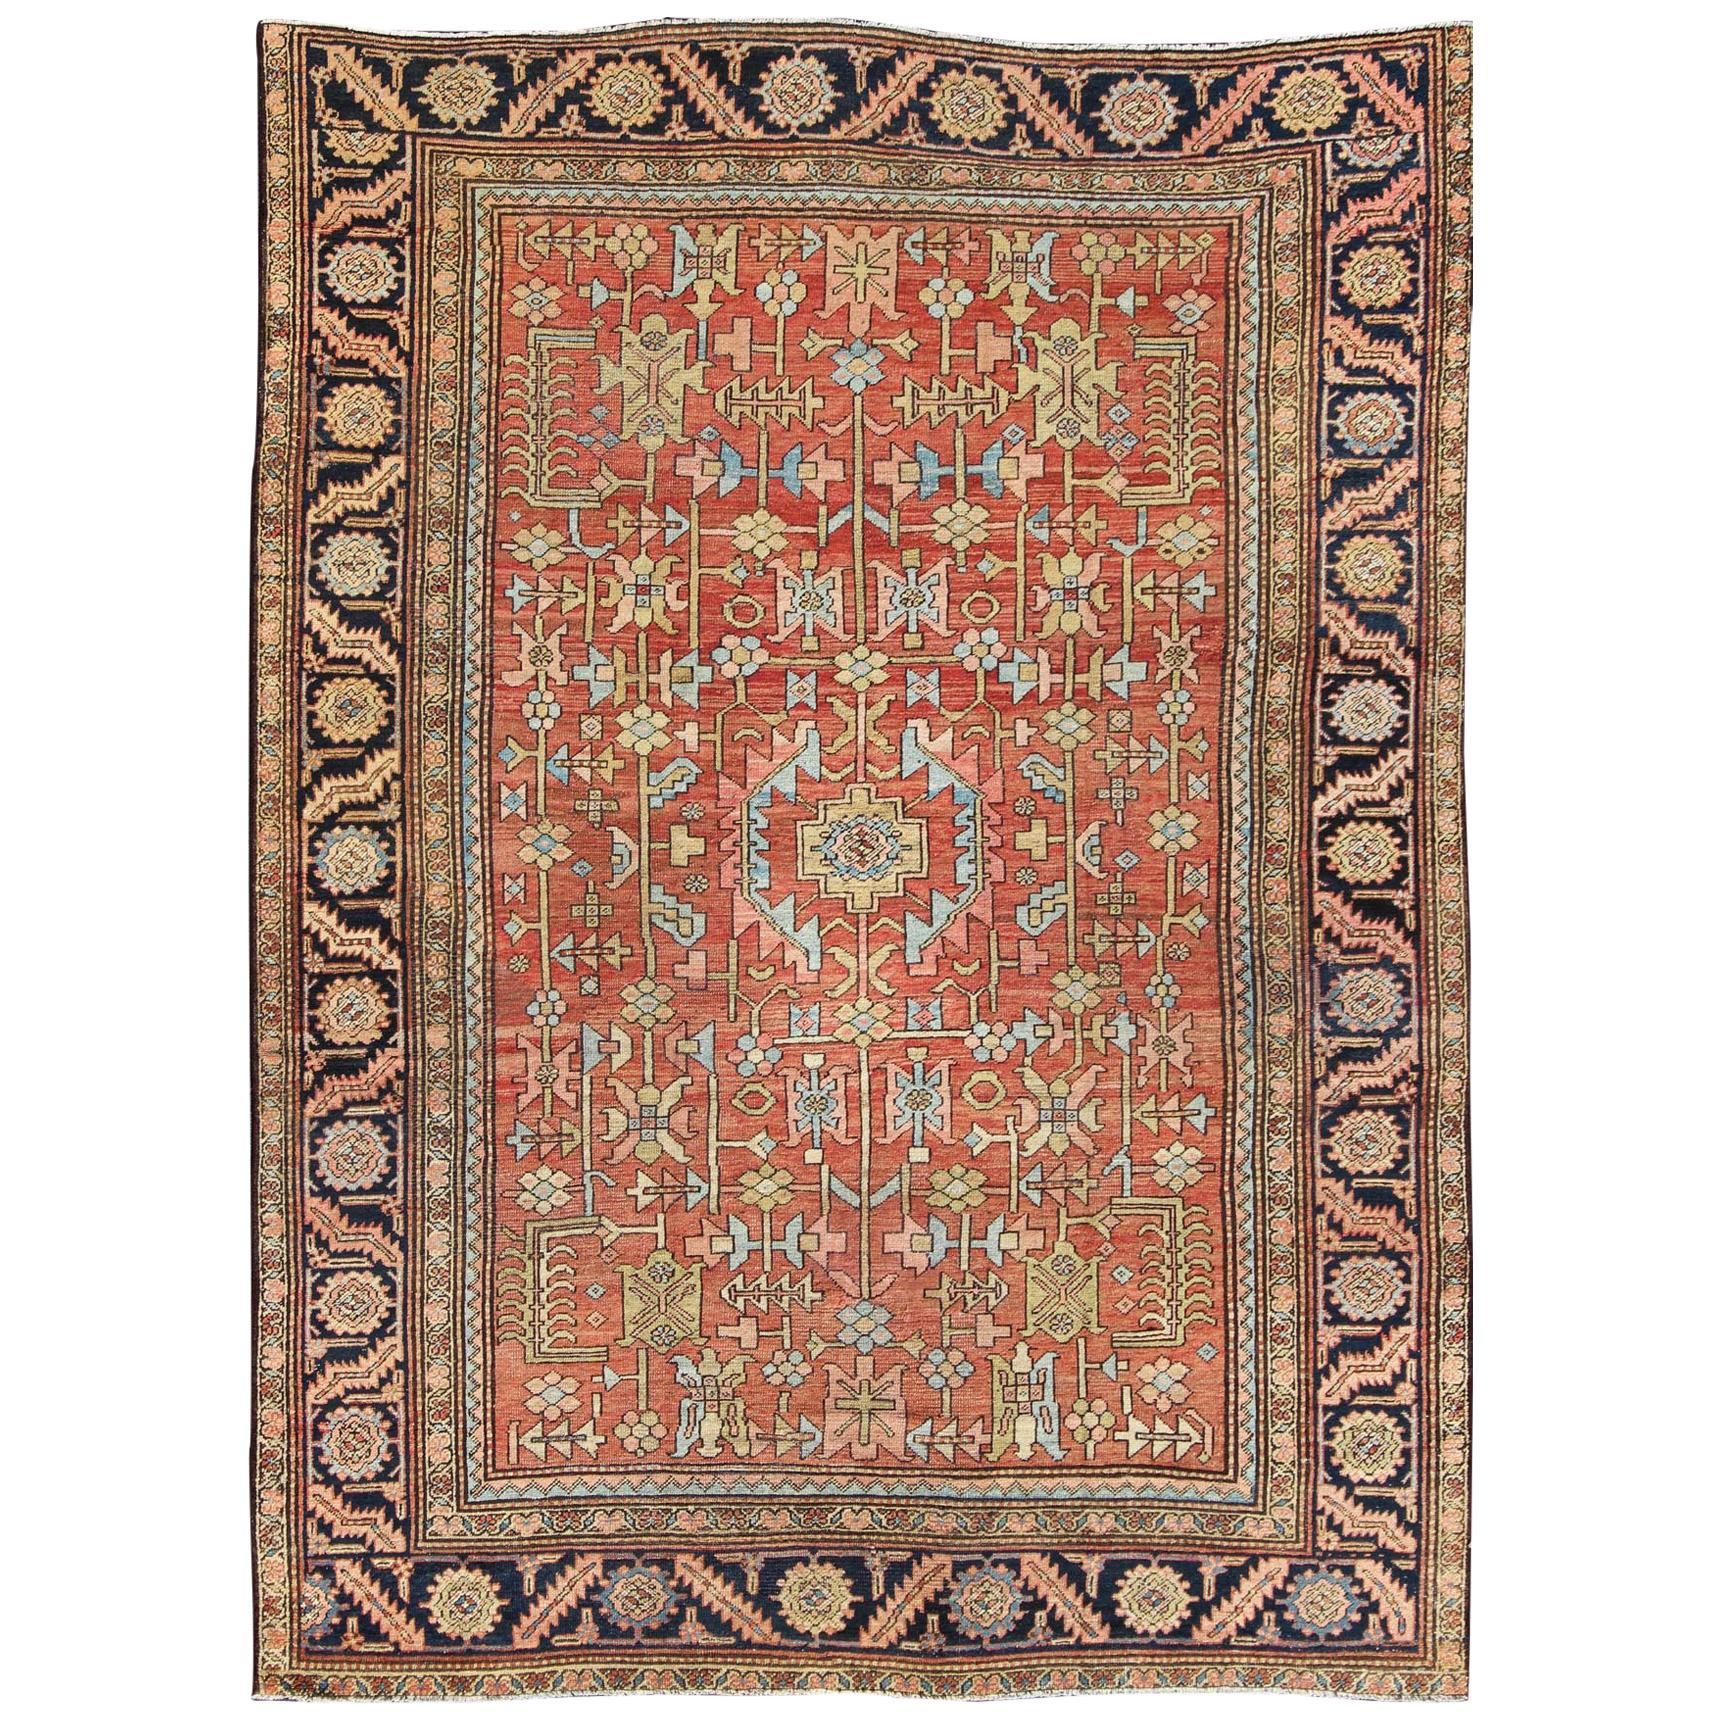   Antique Persian Serapi Rug with All-Over Geometric Design For Sale